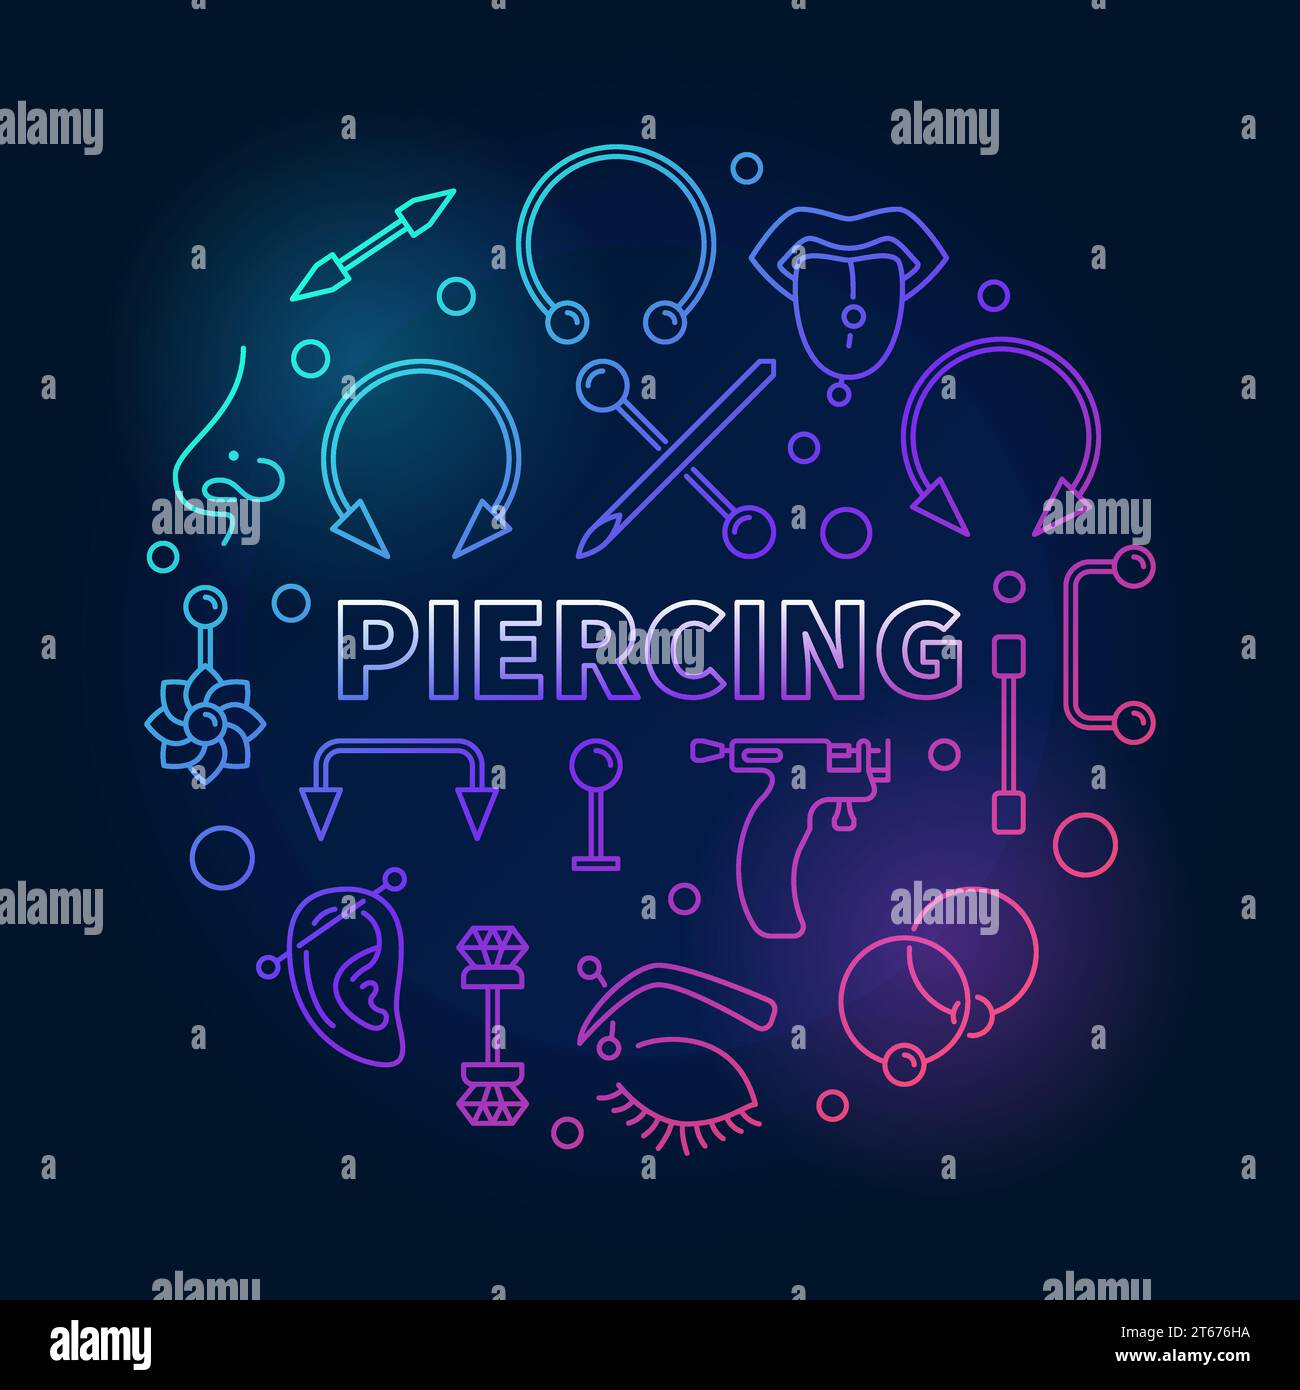 Colored piercing circular vector illustration in thin line style made with cute piercings icons on dark background Stock Vector